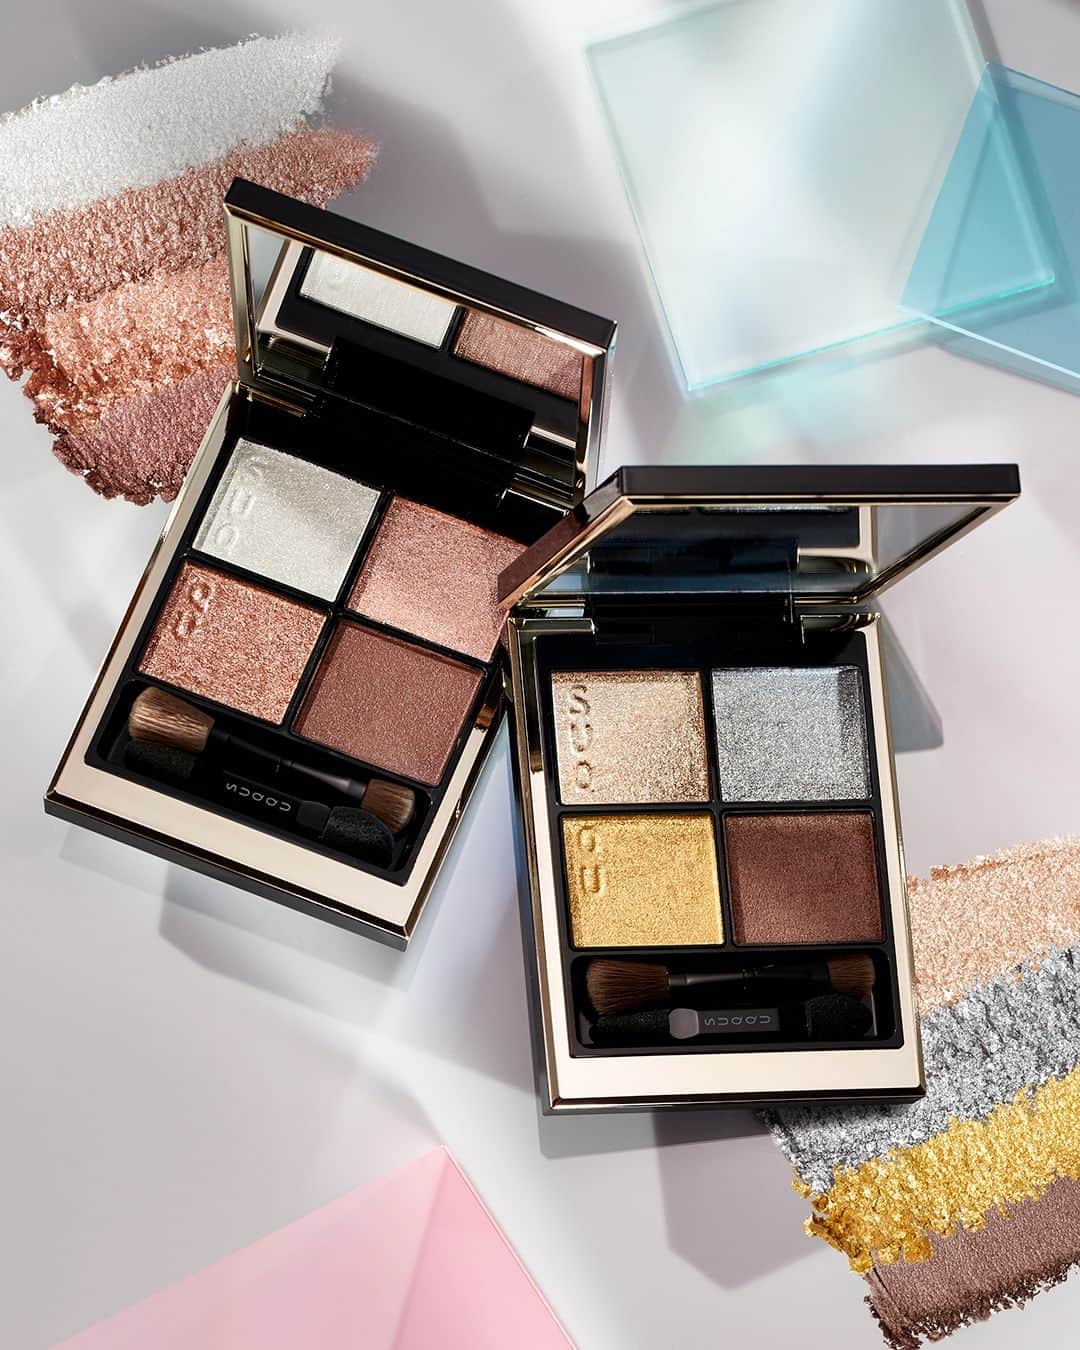 SUQQU公式Instgramアカウントのインスタグラム：「Two gorgeous palettes express the holiday season's elation and playfulness. The richly pearlised yet smooth powder adheres to the eyelids as if embracing the skin. The diffused shimmer creates glistening, alluring eyes. One matte color in the set gives the eyes the depth you desire.  SIGNATURE COLOR EYES 129 -AMAIZUYA [Limited color] 130 -TSUYAZOROI [Limited color]  ホリデーシーズンの高揚感、遊び心を表現した華やかなパレット2種。 パールリッチでありながら、なめらかな粉質で寄り添うようにまぶたに密着。乱反射した煌めきが、濡れたような艷やかな目元を演出します。マットカラーを1色セットすることで、目元の深みも思うがまま。  シグニチャー カラー アイズ 129 甘艶 -AMAIZUYA [限定色] 130 艶揃 -TSUYAZOROI [限定色]  #SUQQU #スック #jbeauty #cosmetics #SUQQU20th #SUQQUcolormakeup #wintercolorcollection #newproducts #holiday #limited #シグニチャーカラーアイズ」